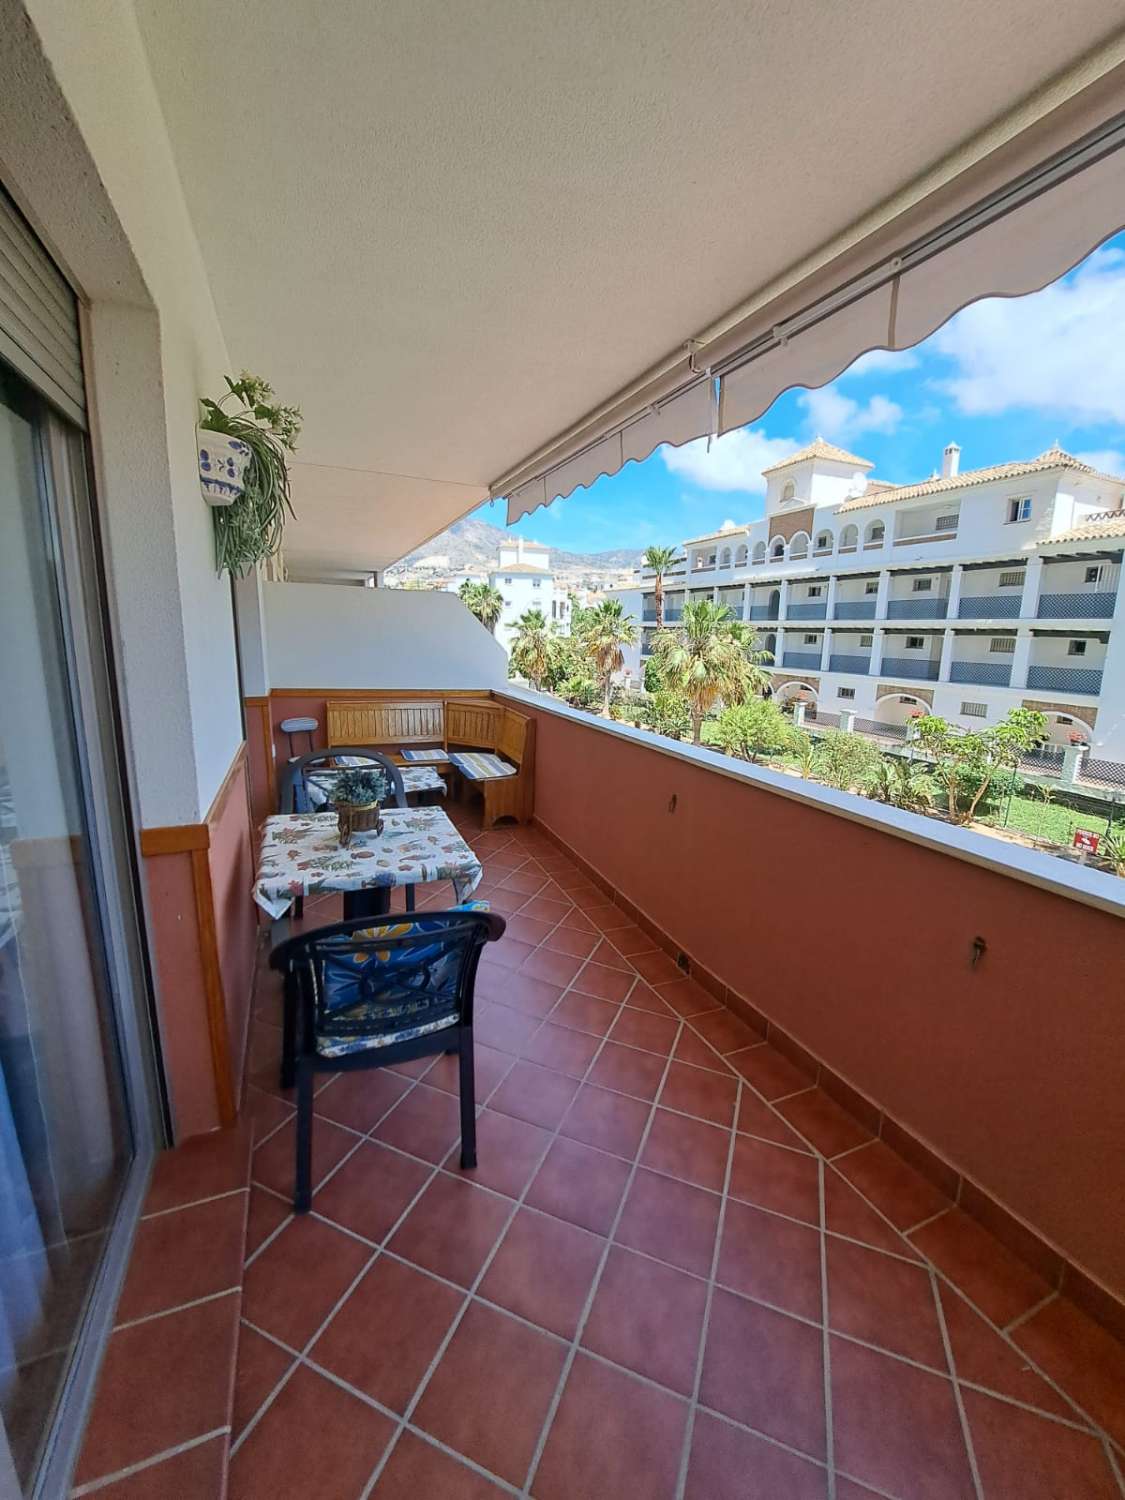 NICE ONE-BEDROOM APARTMENT 200 METERS FROM THE BEACH